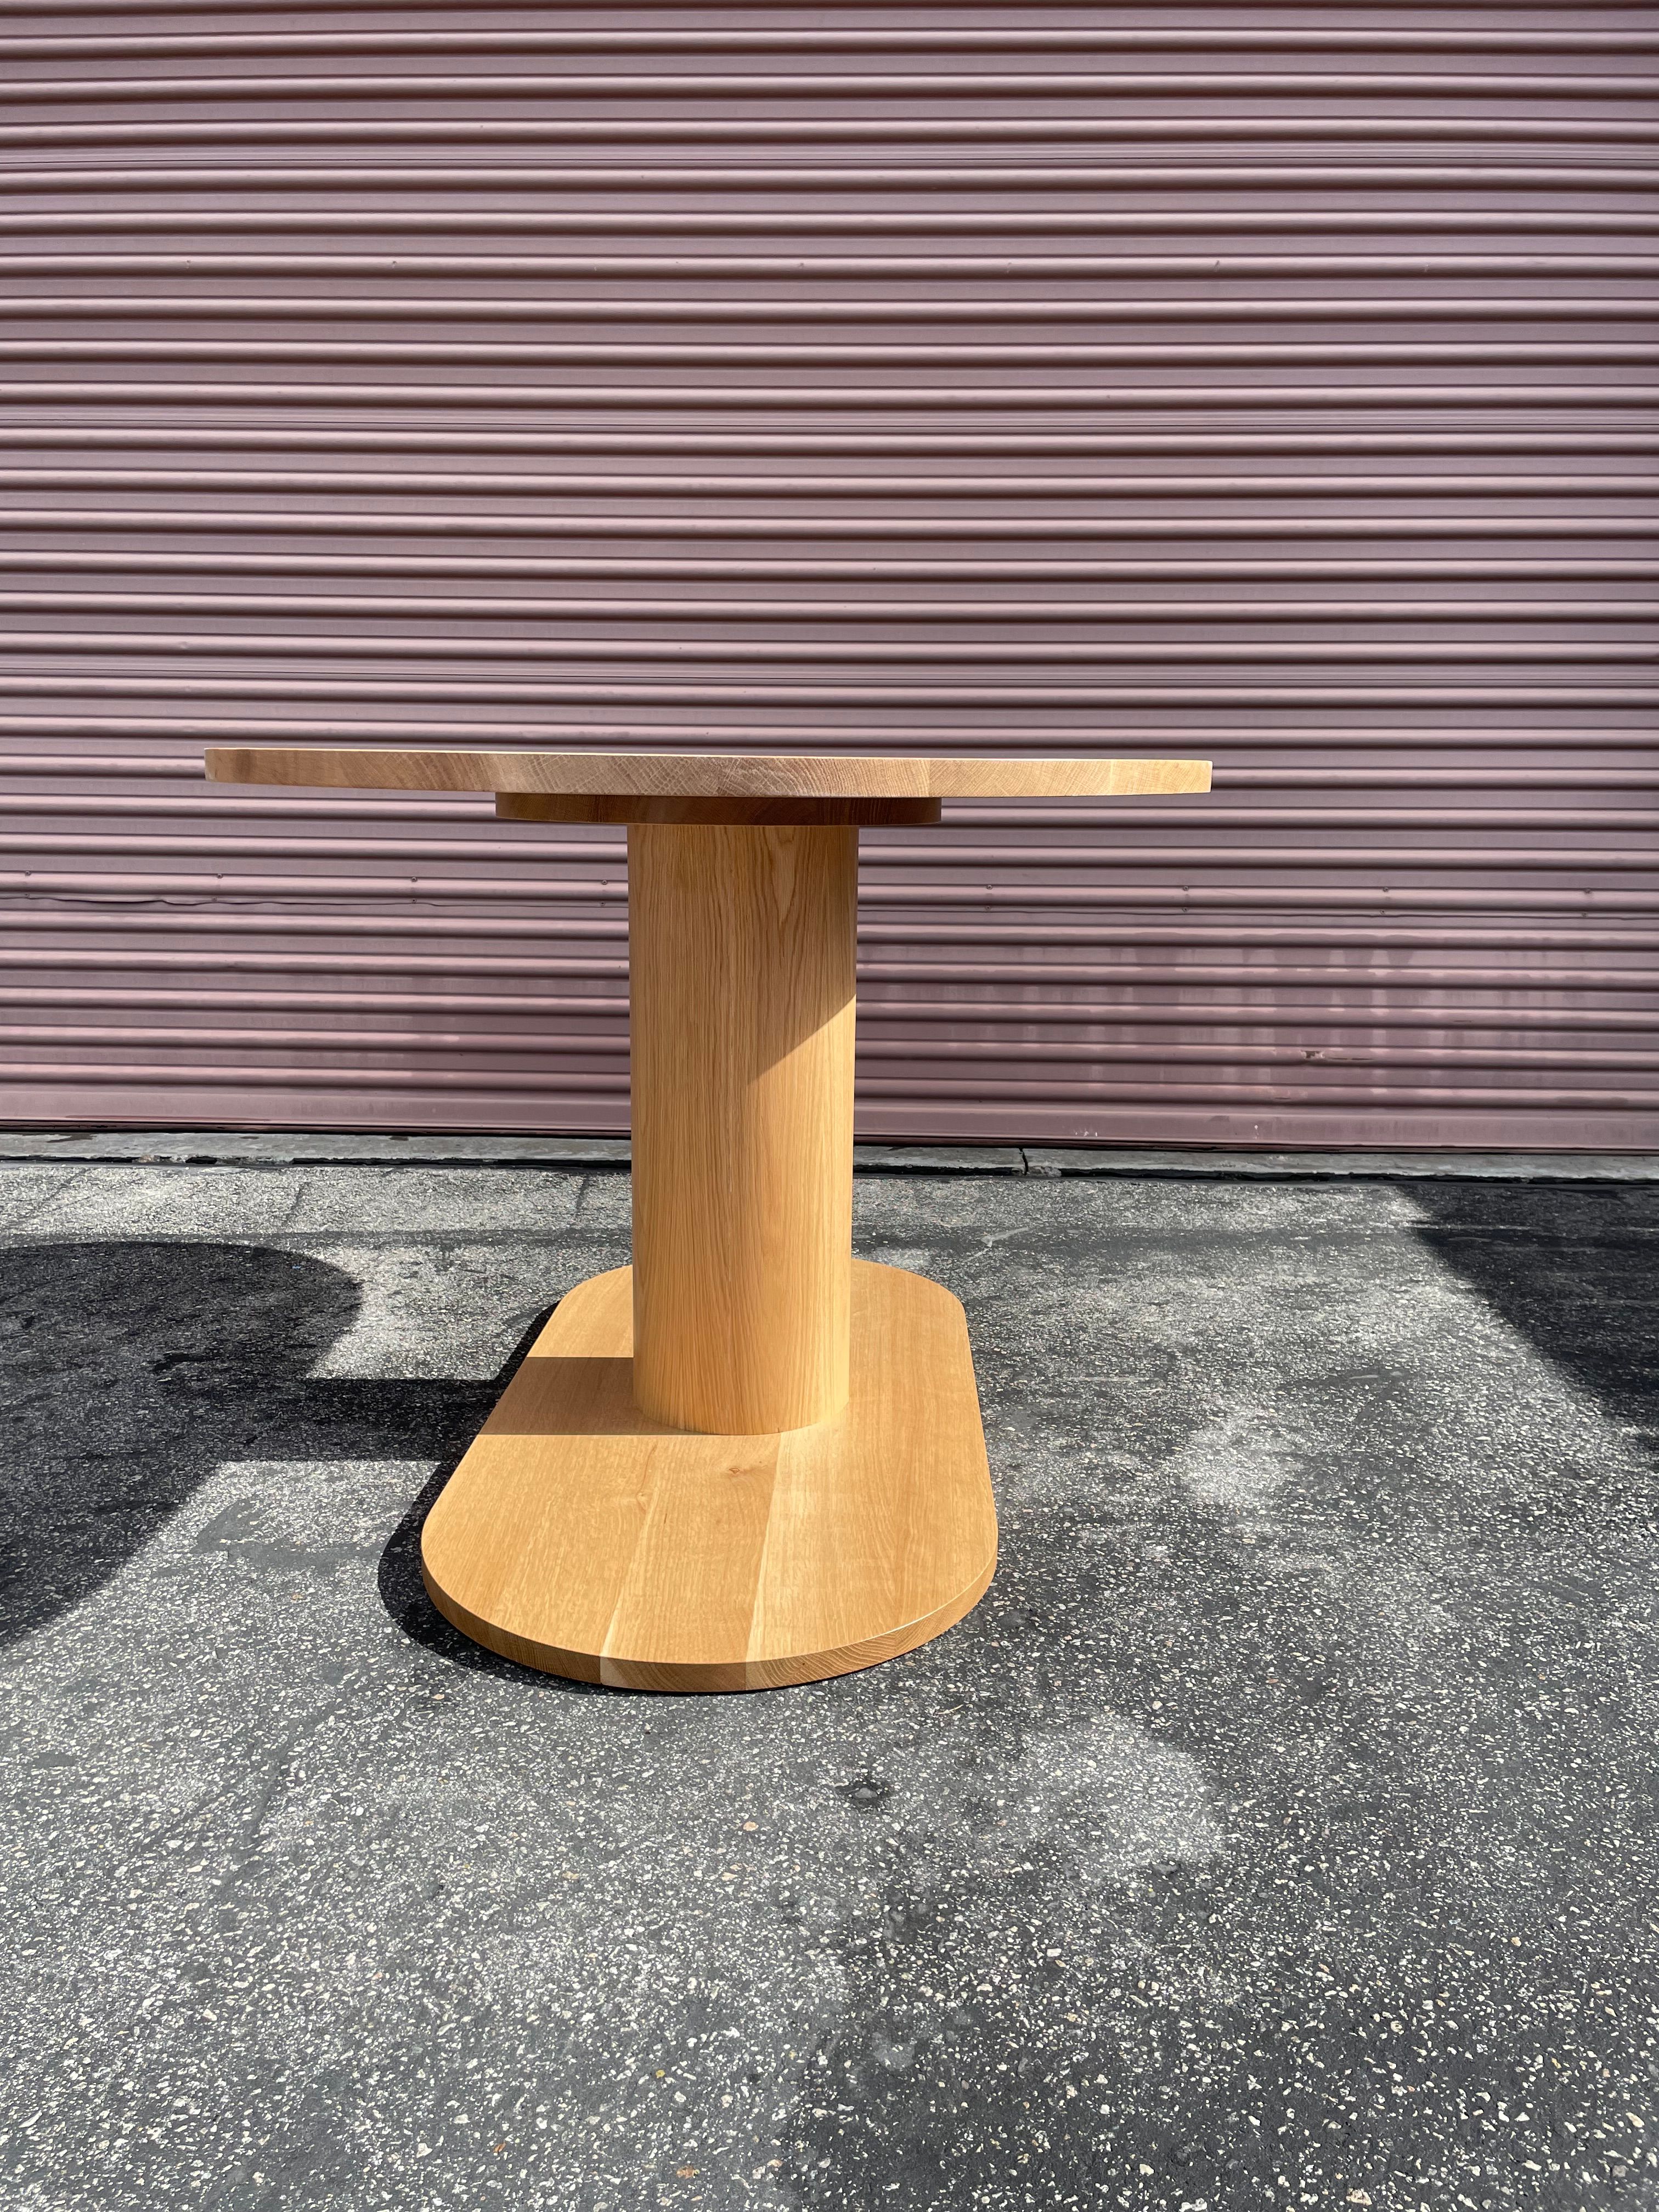  White Oak Dining Table - Frederick Tang Architecture product image 6